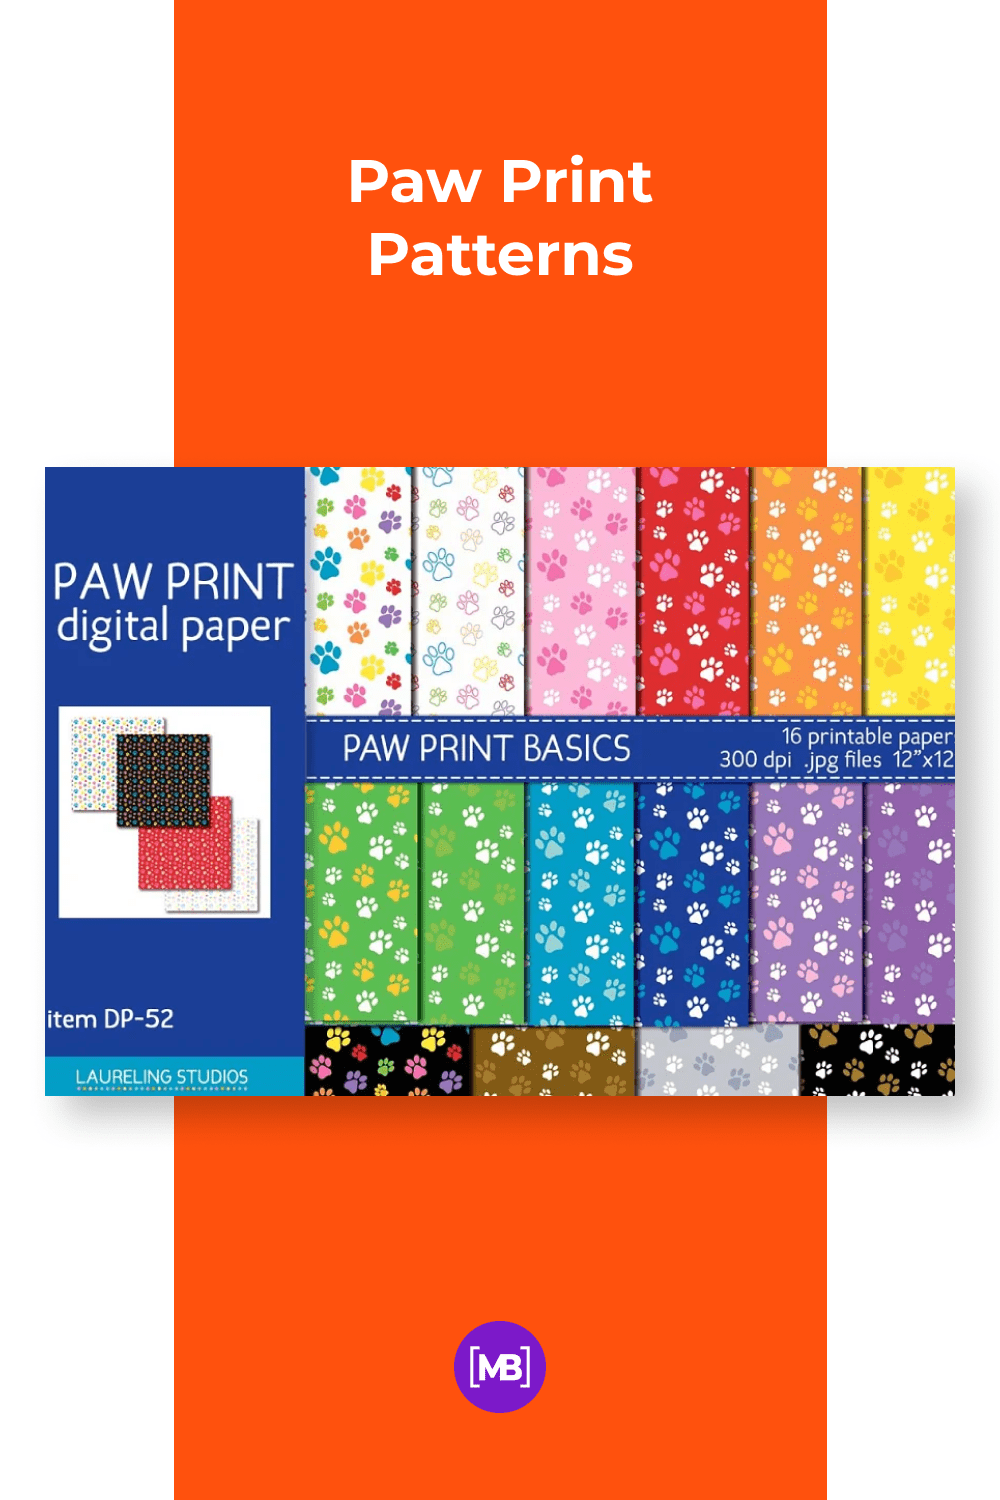 A big collection of paw print patterns.